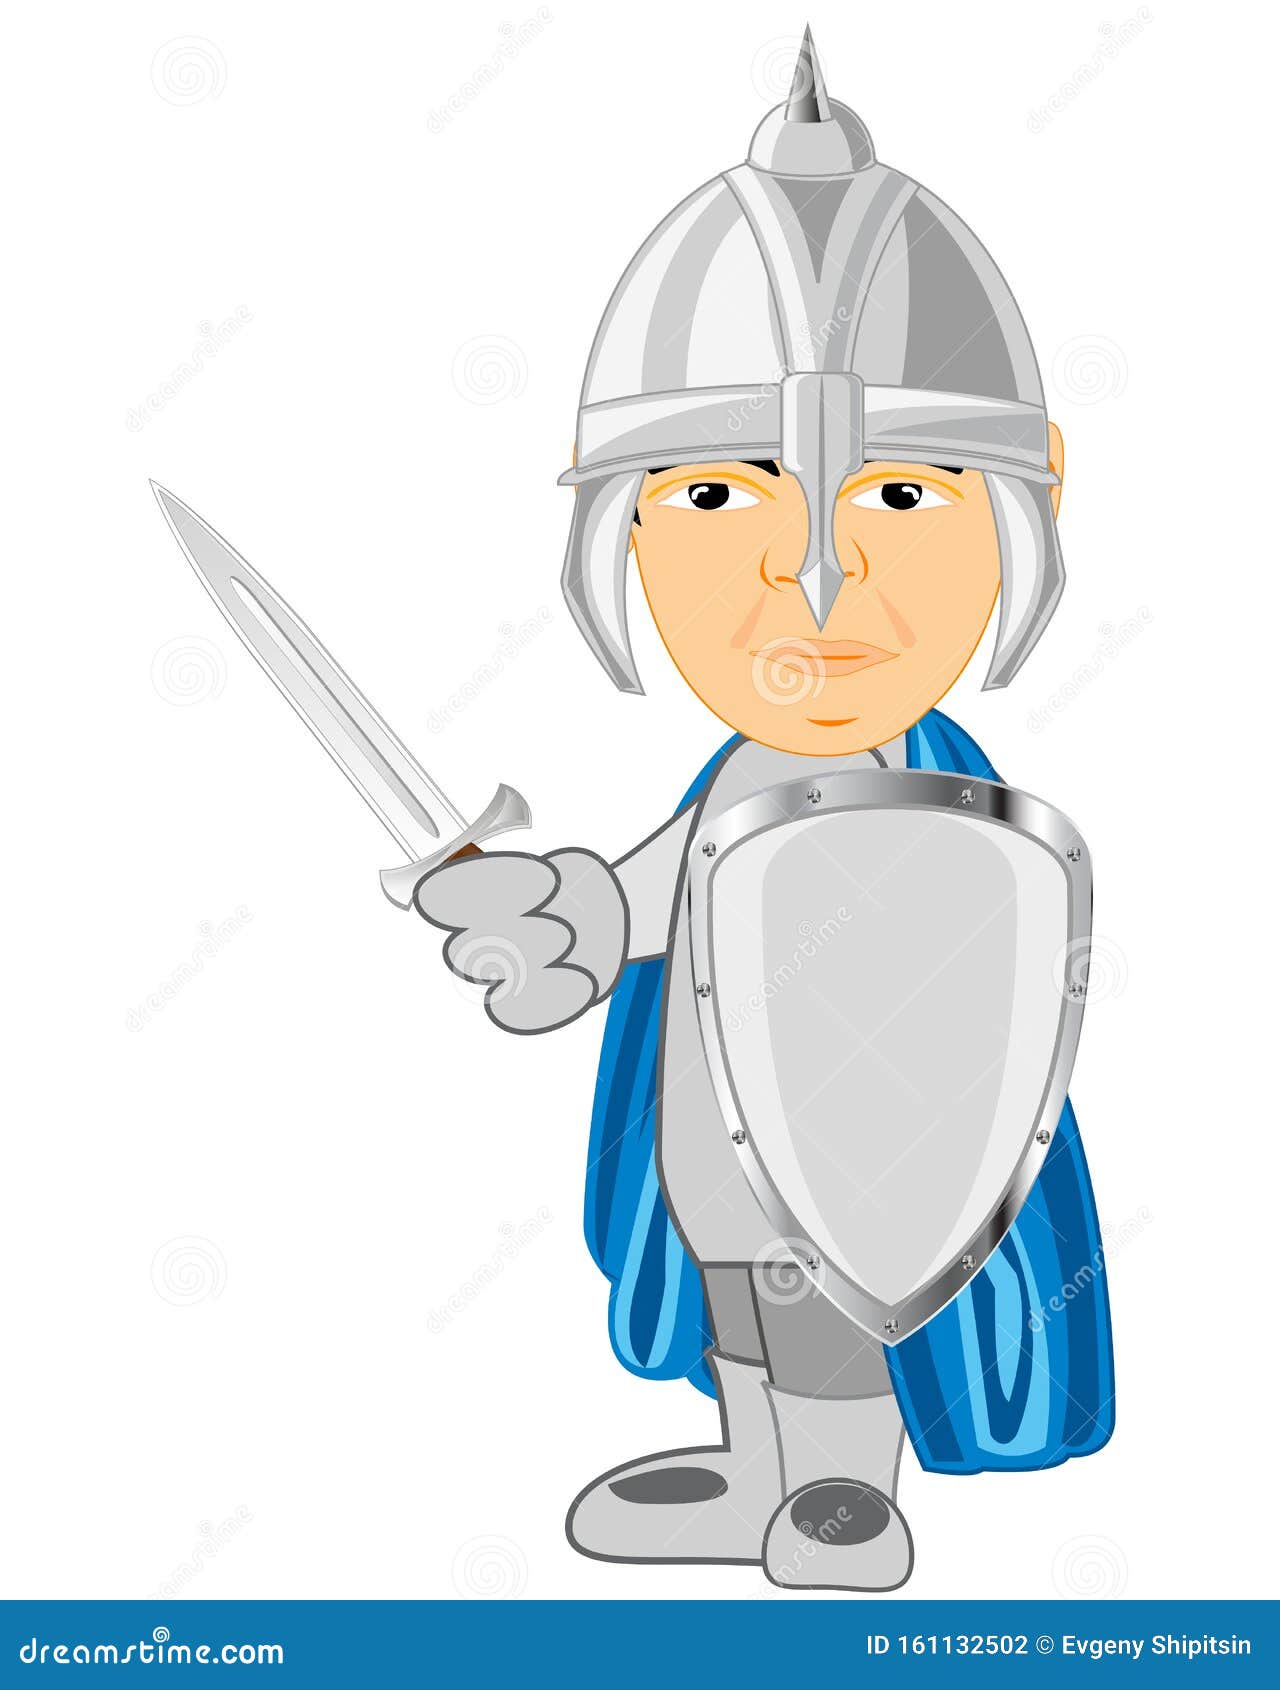 Vector Illustration of the Cartoon of the Medieval Knight Stock Vector ...